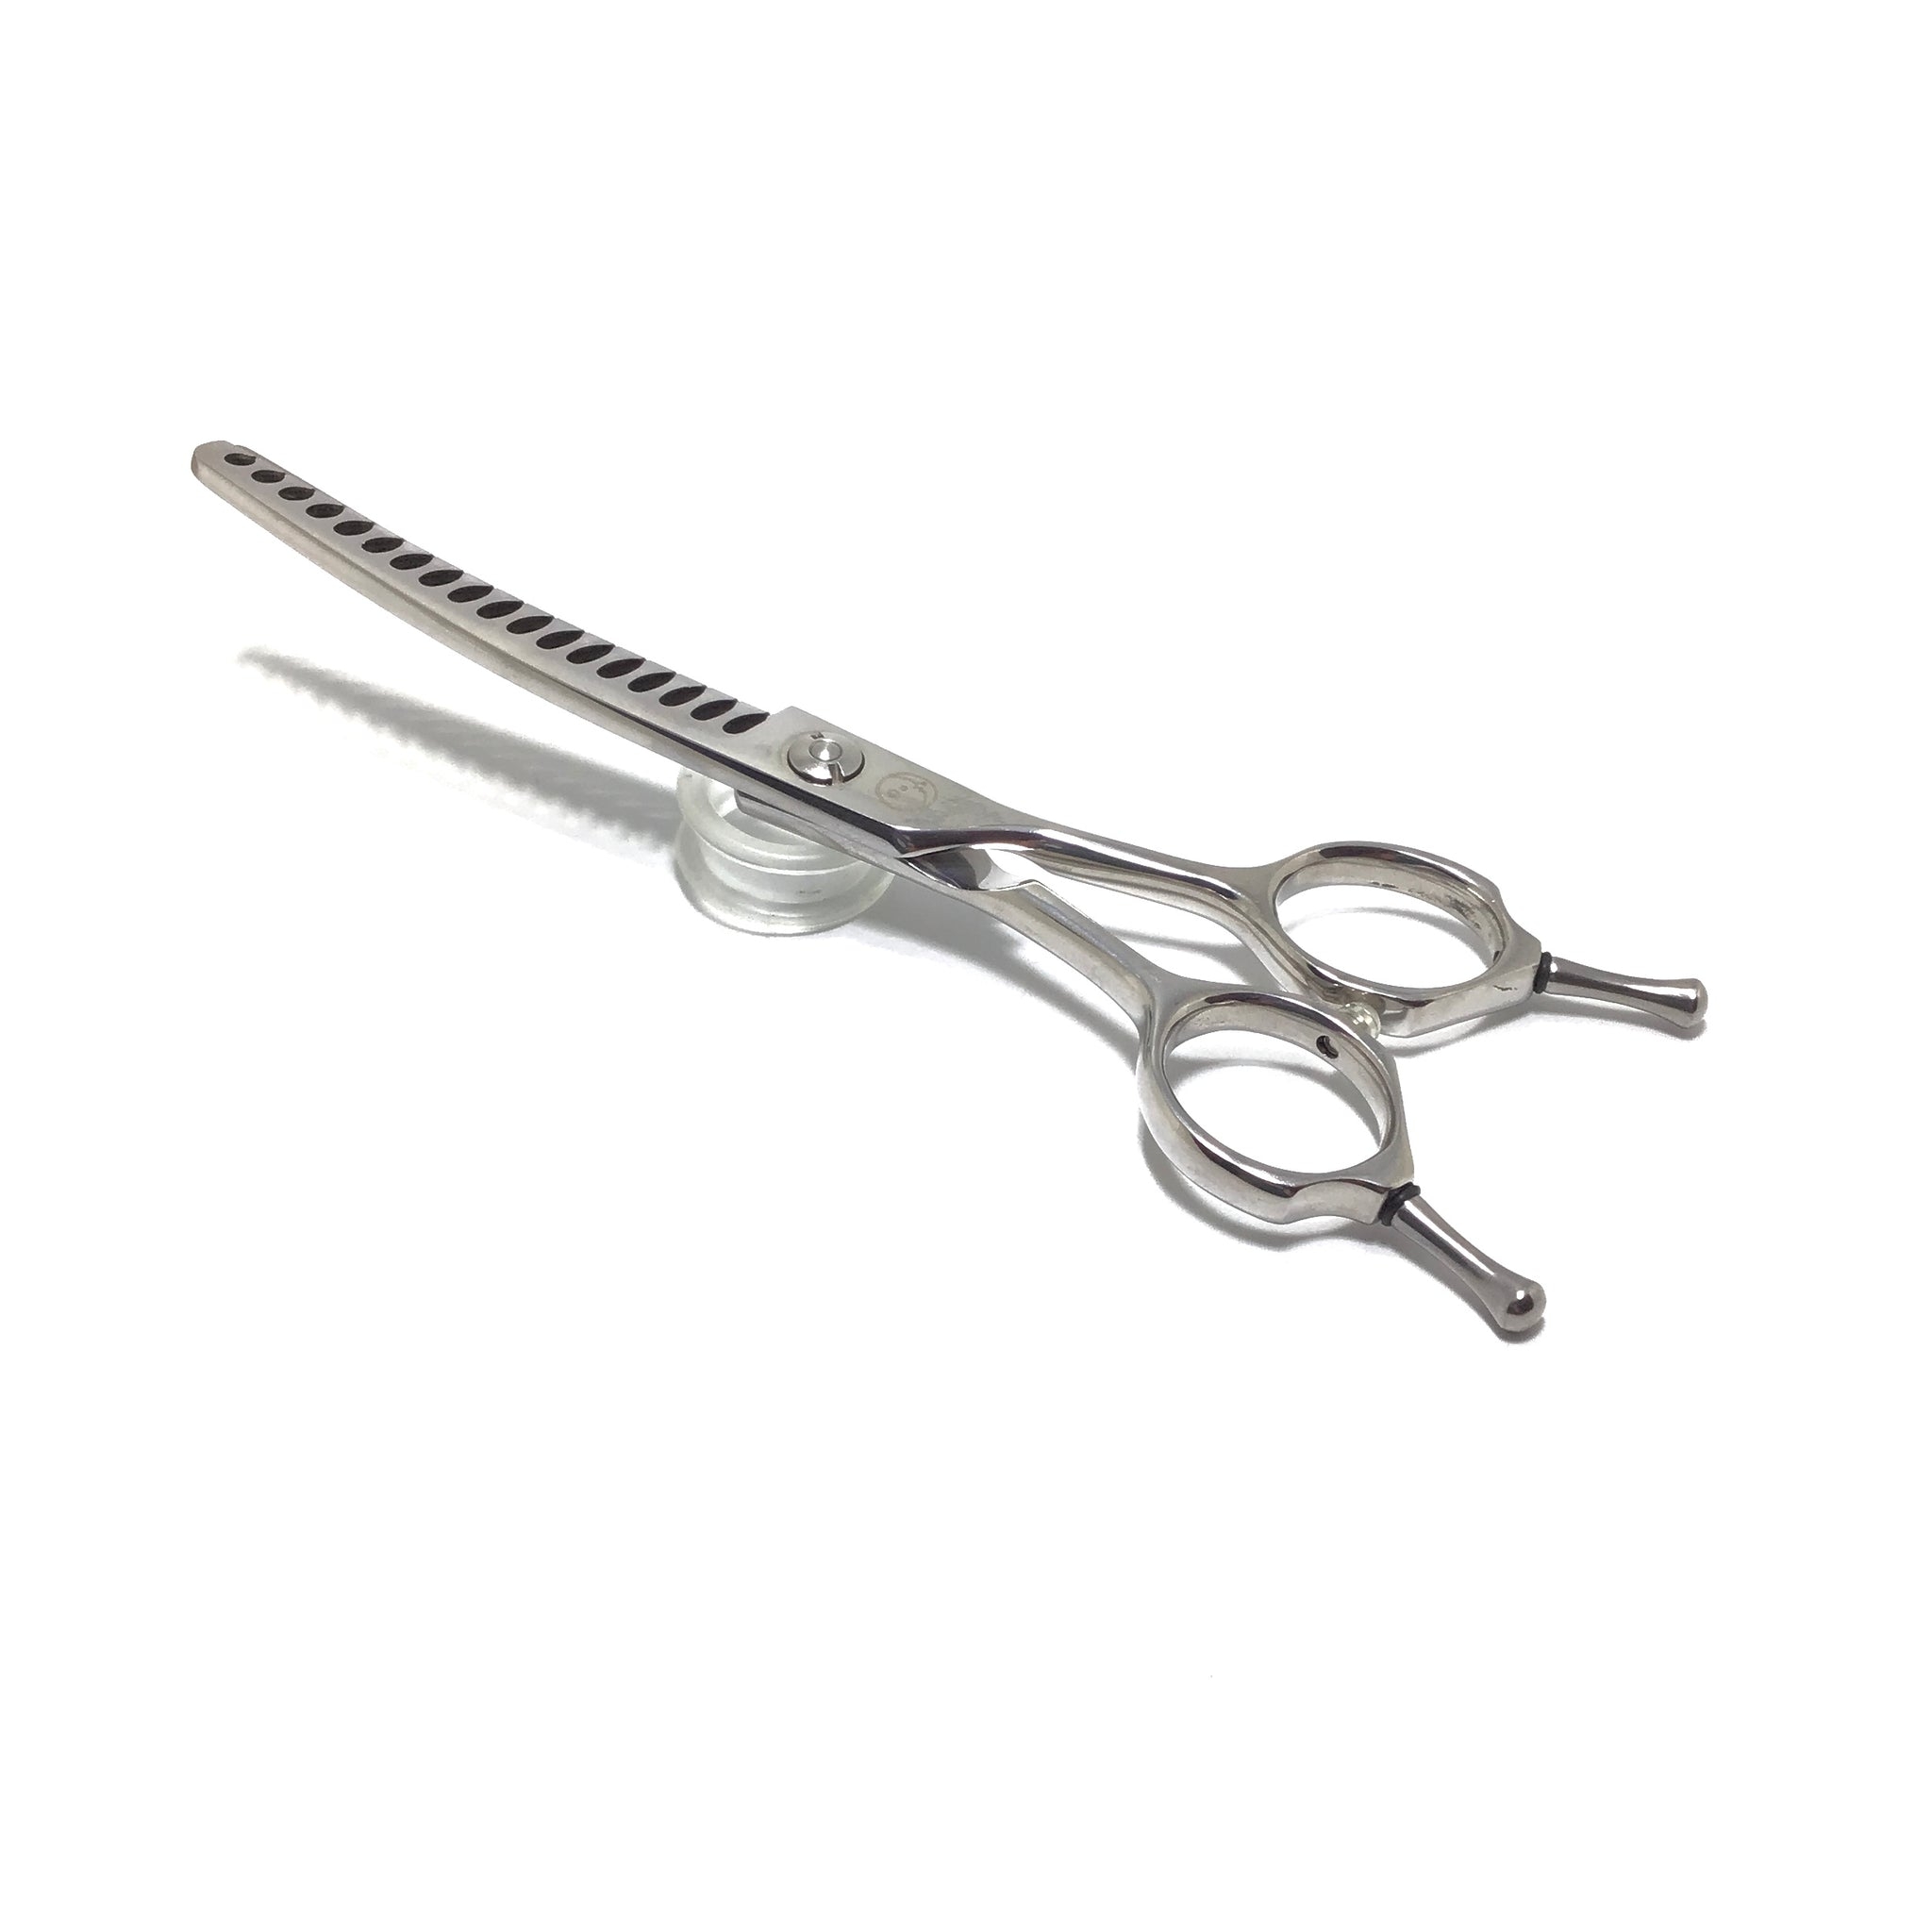 Rogue Paq Python Trimming Scissors  Anthropologie Taiwan - Women's  Clothing, Accessories & Home